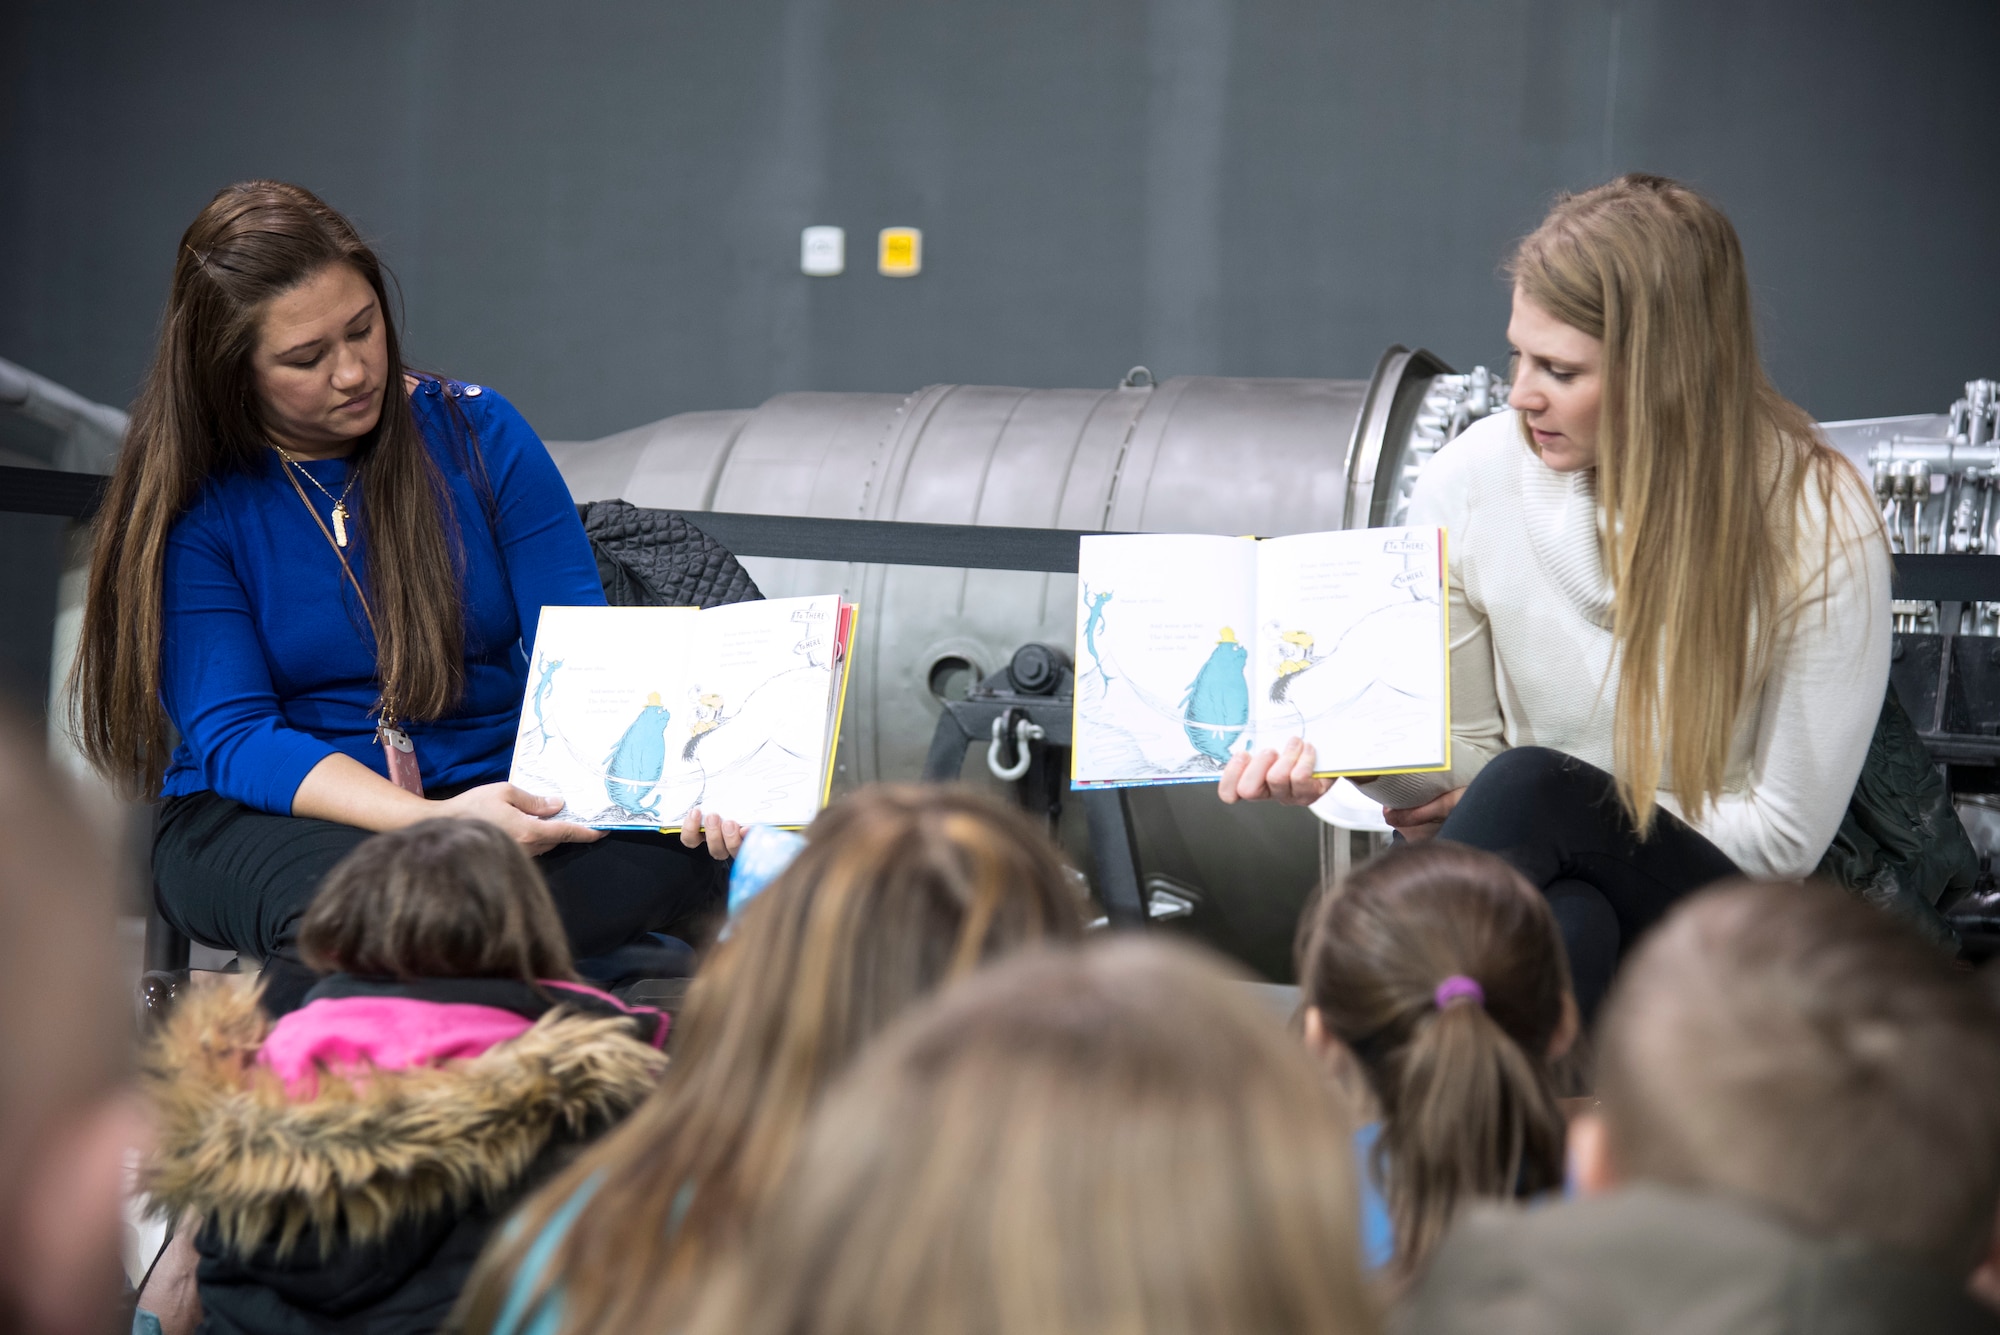 DAYTON, Ohio -- More than 850 local second and third grade students participated in the museum’s 20th annual Read Across America "Read-In" from Feb 28-March 1, 2019. Volunteers from Wright-Patterson AFB read books to the students as part of the national celebration honoring Dr. Seuss’ 115th birthday. (U.S. Air Force photo)